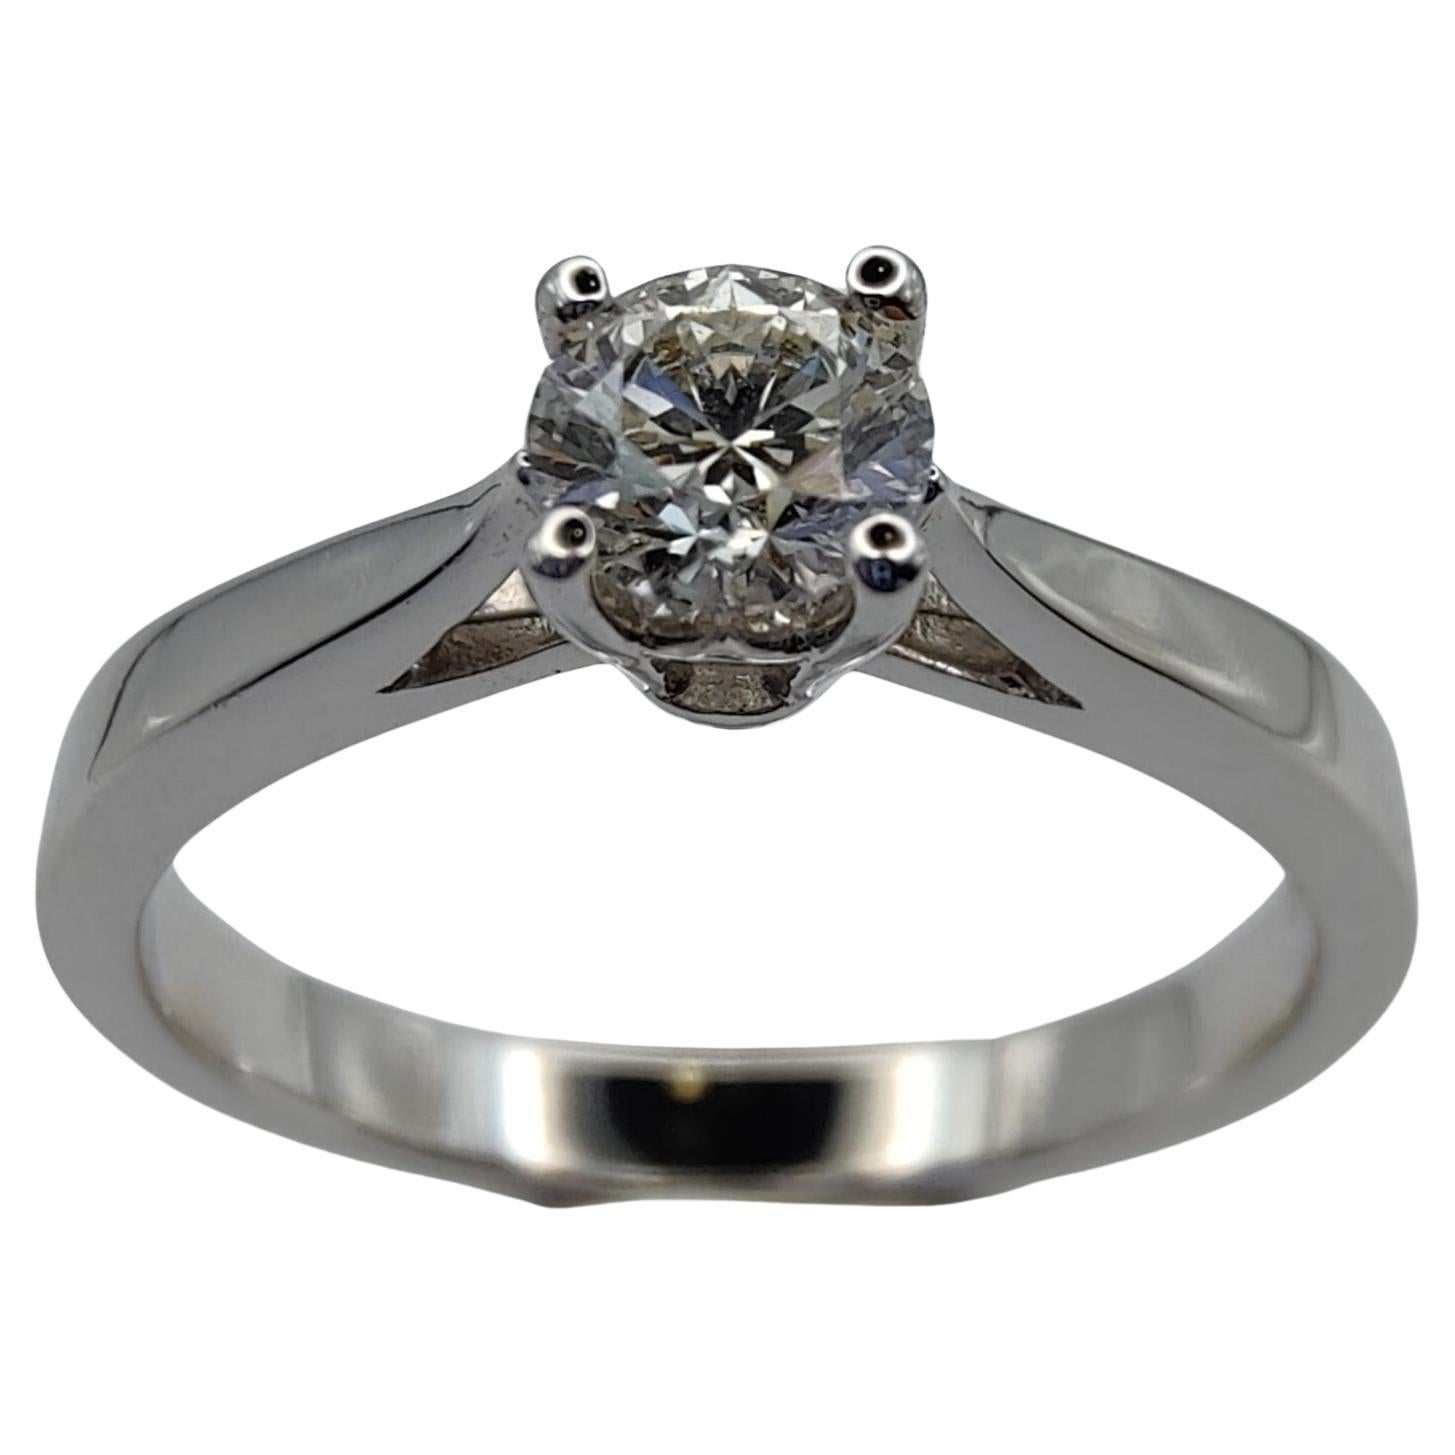 Classic Modern Solitaire Diamond Engagement Ring in 18K White Gold